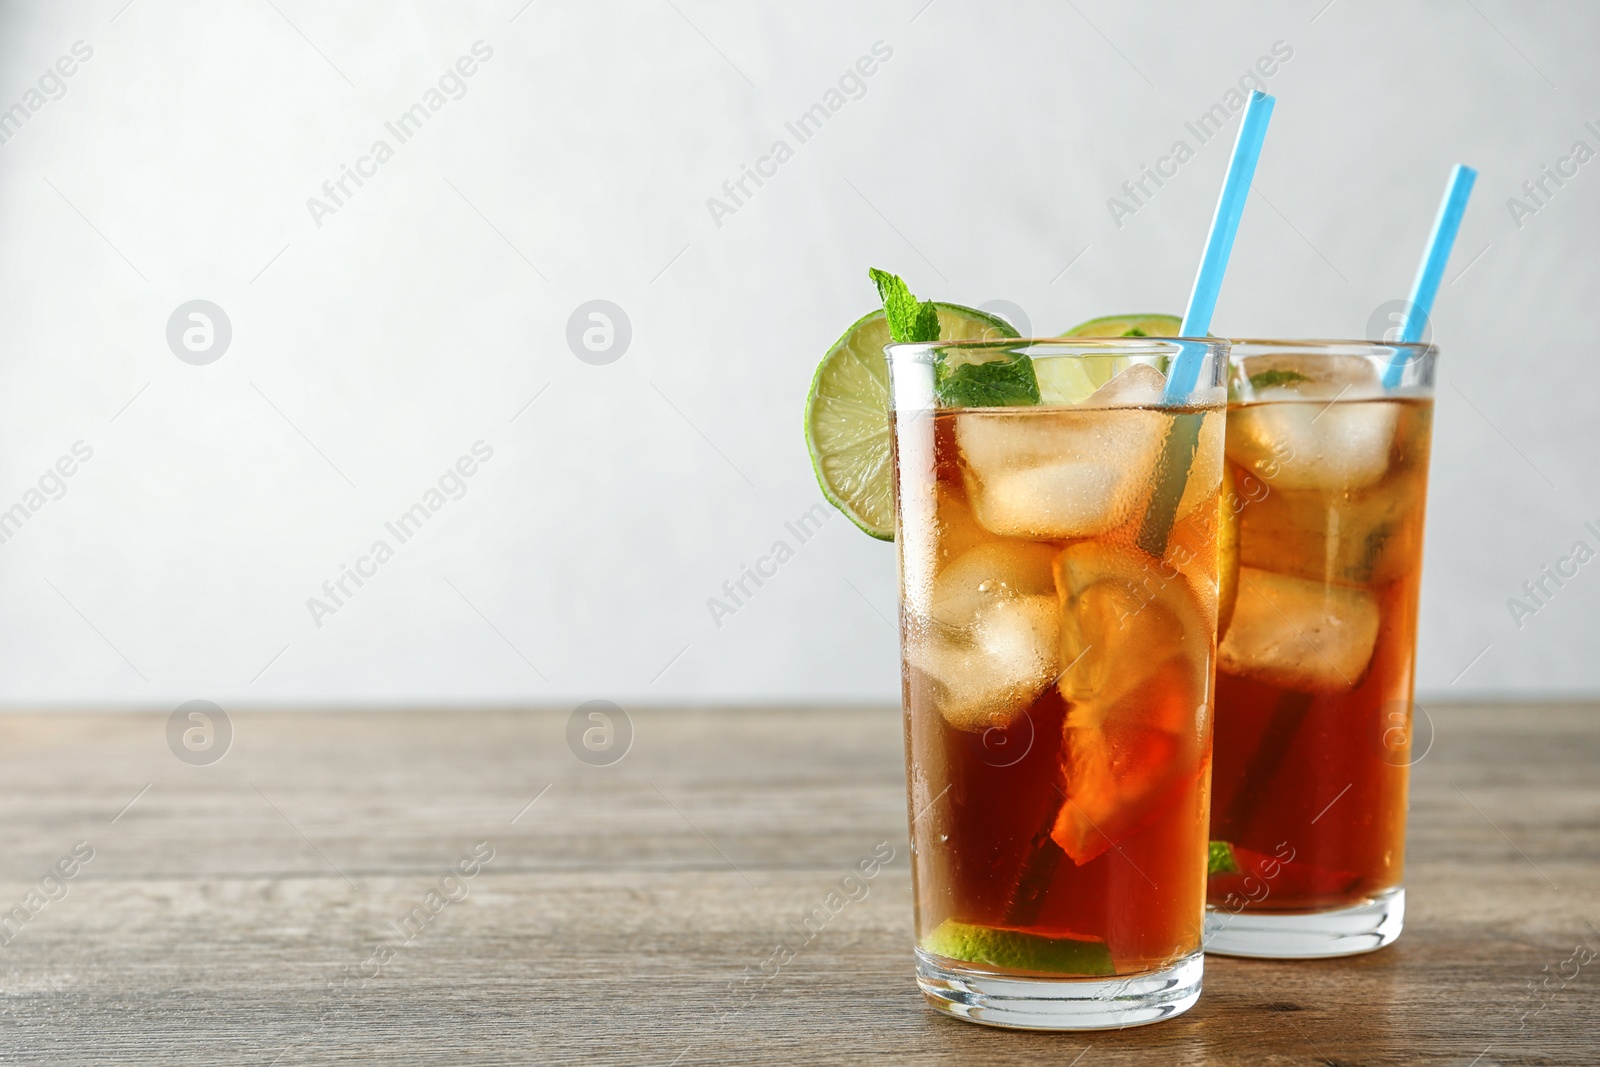 Photo of Glasses of refreshing iced tea on wooden table against light background. Space for text